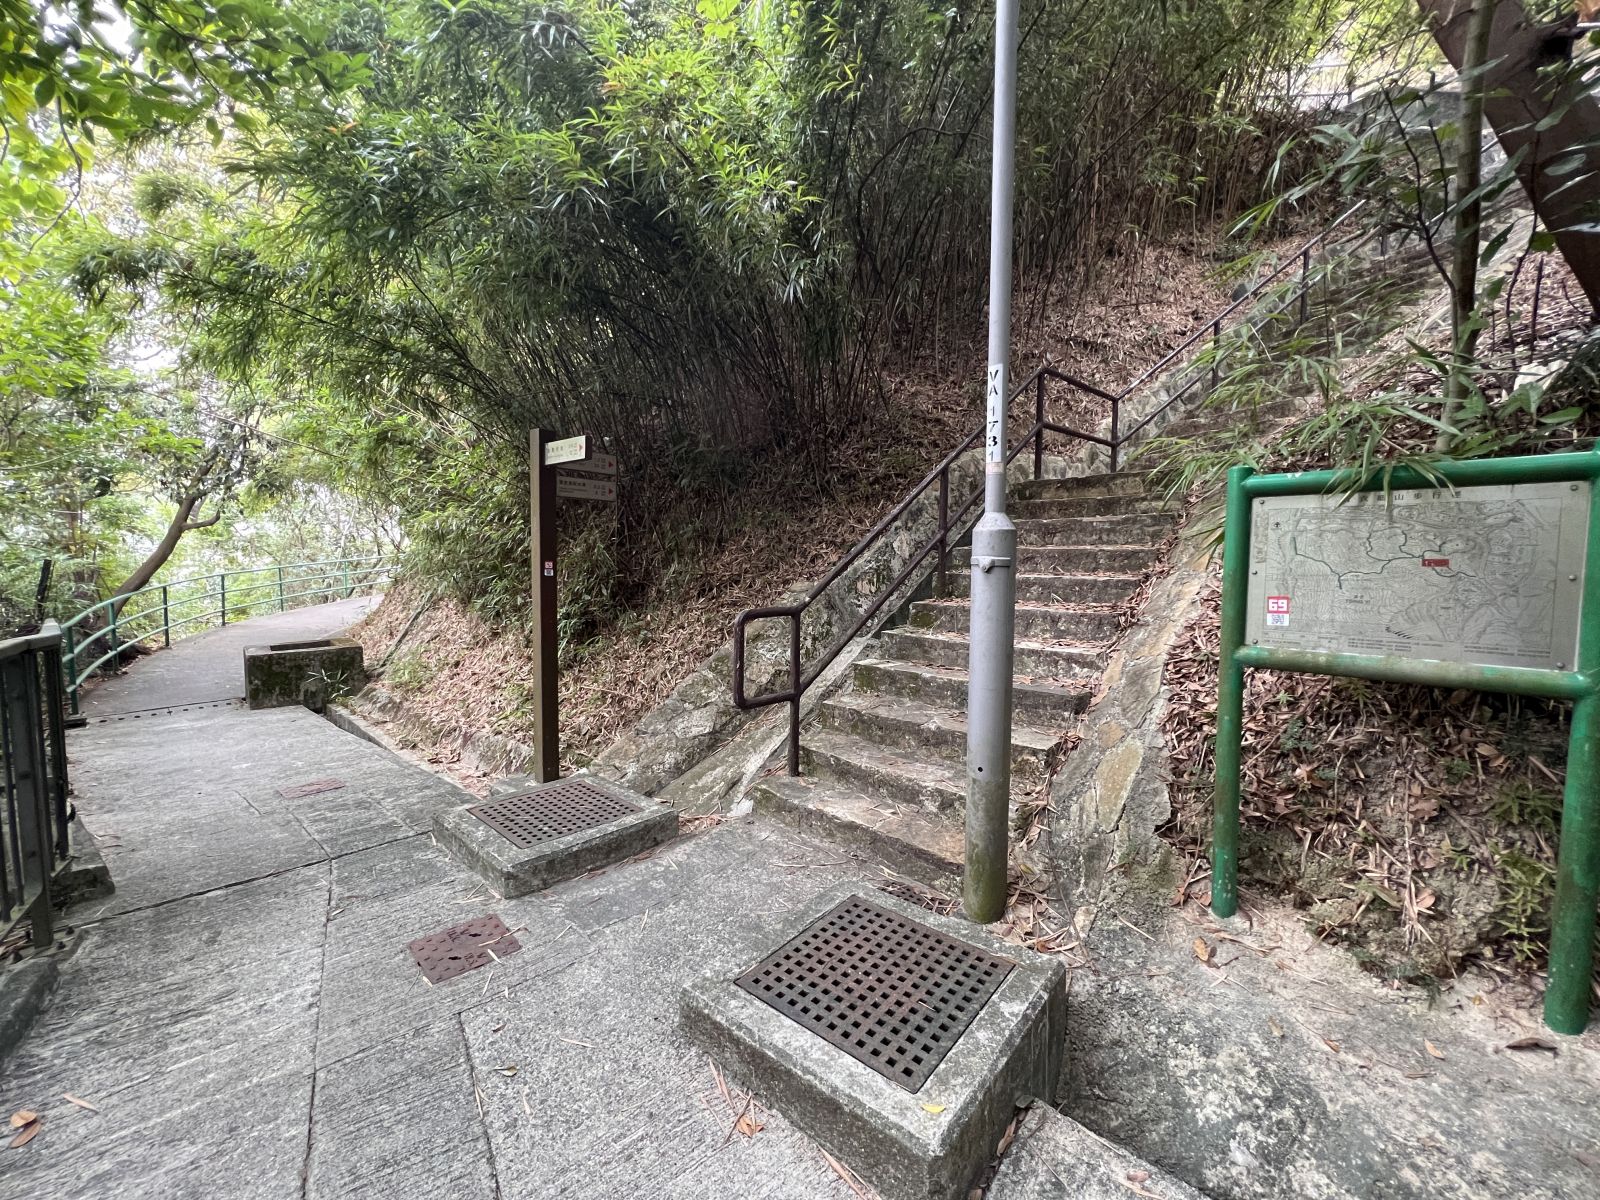 At the first fork in the path, turn right and climb the stairs. 